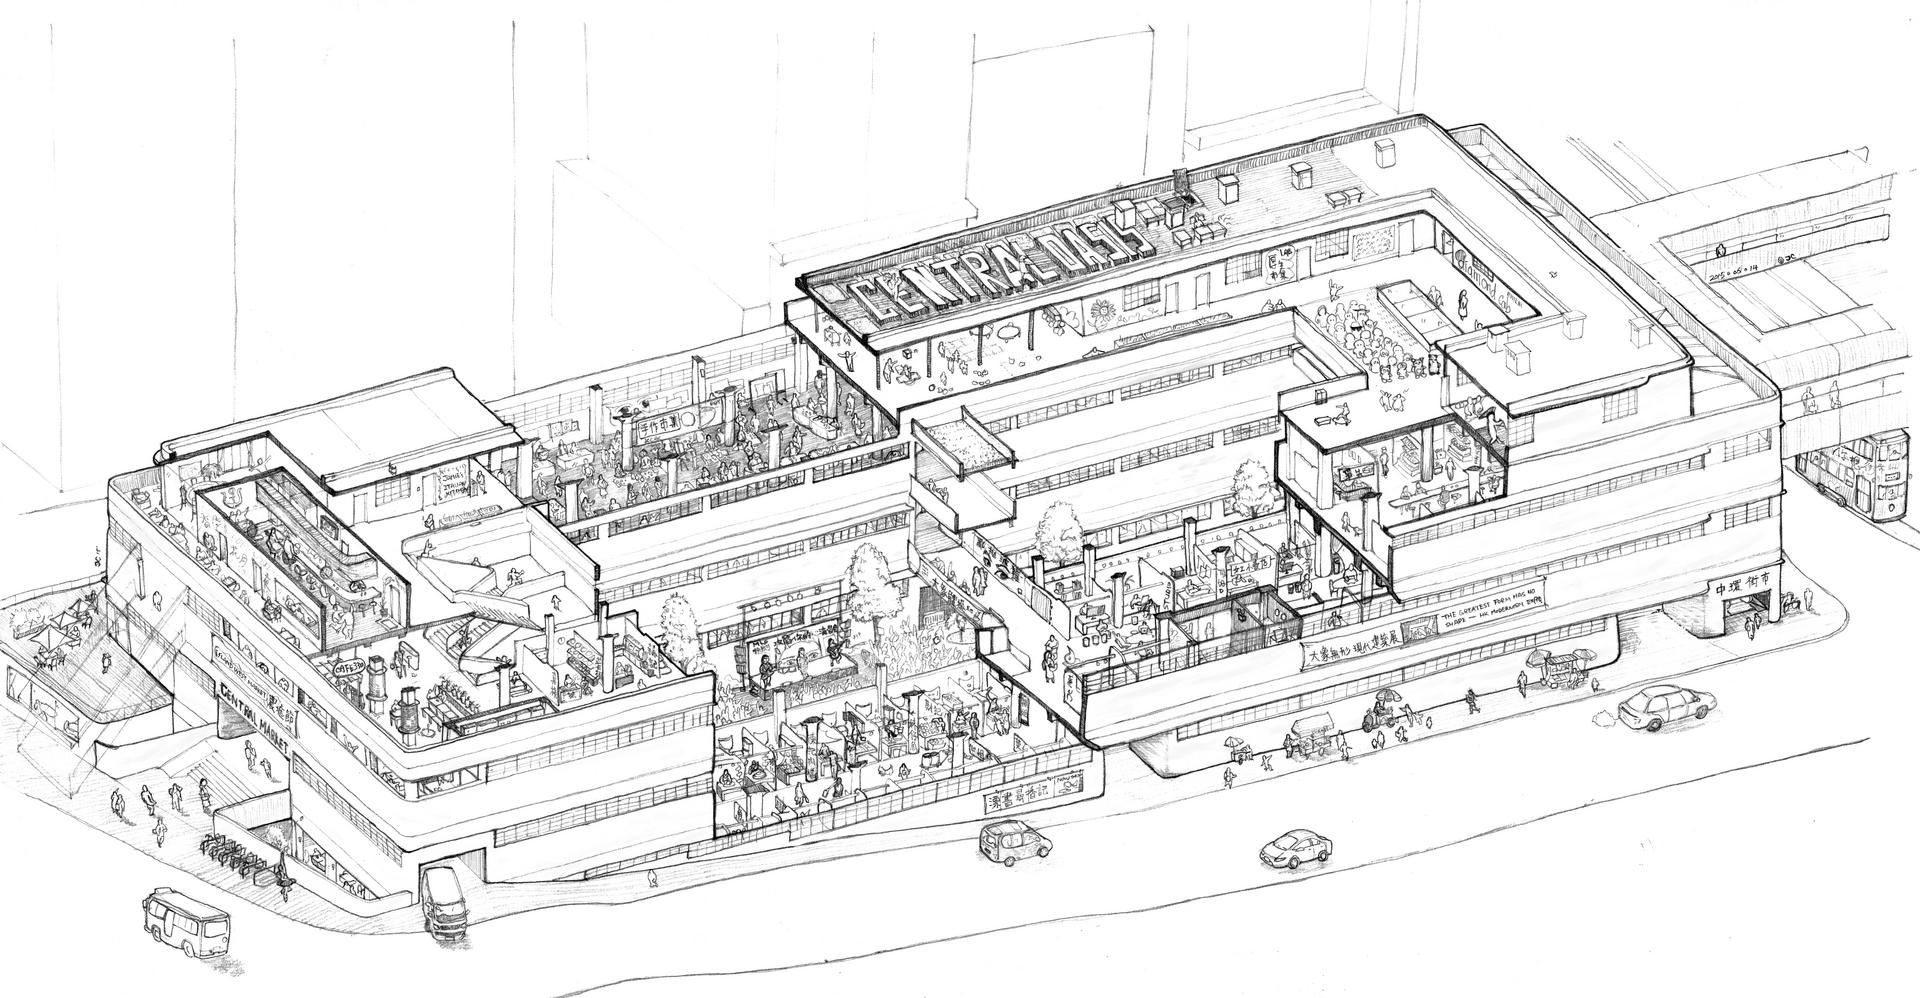 A design for Central Market by Chan Hoi-cheung. Photo: SCMP Pictures